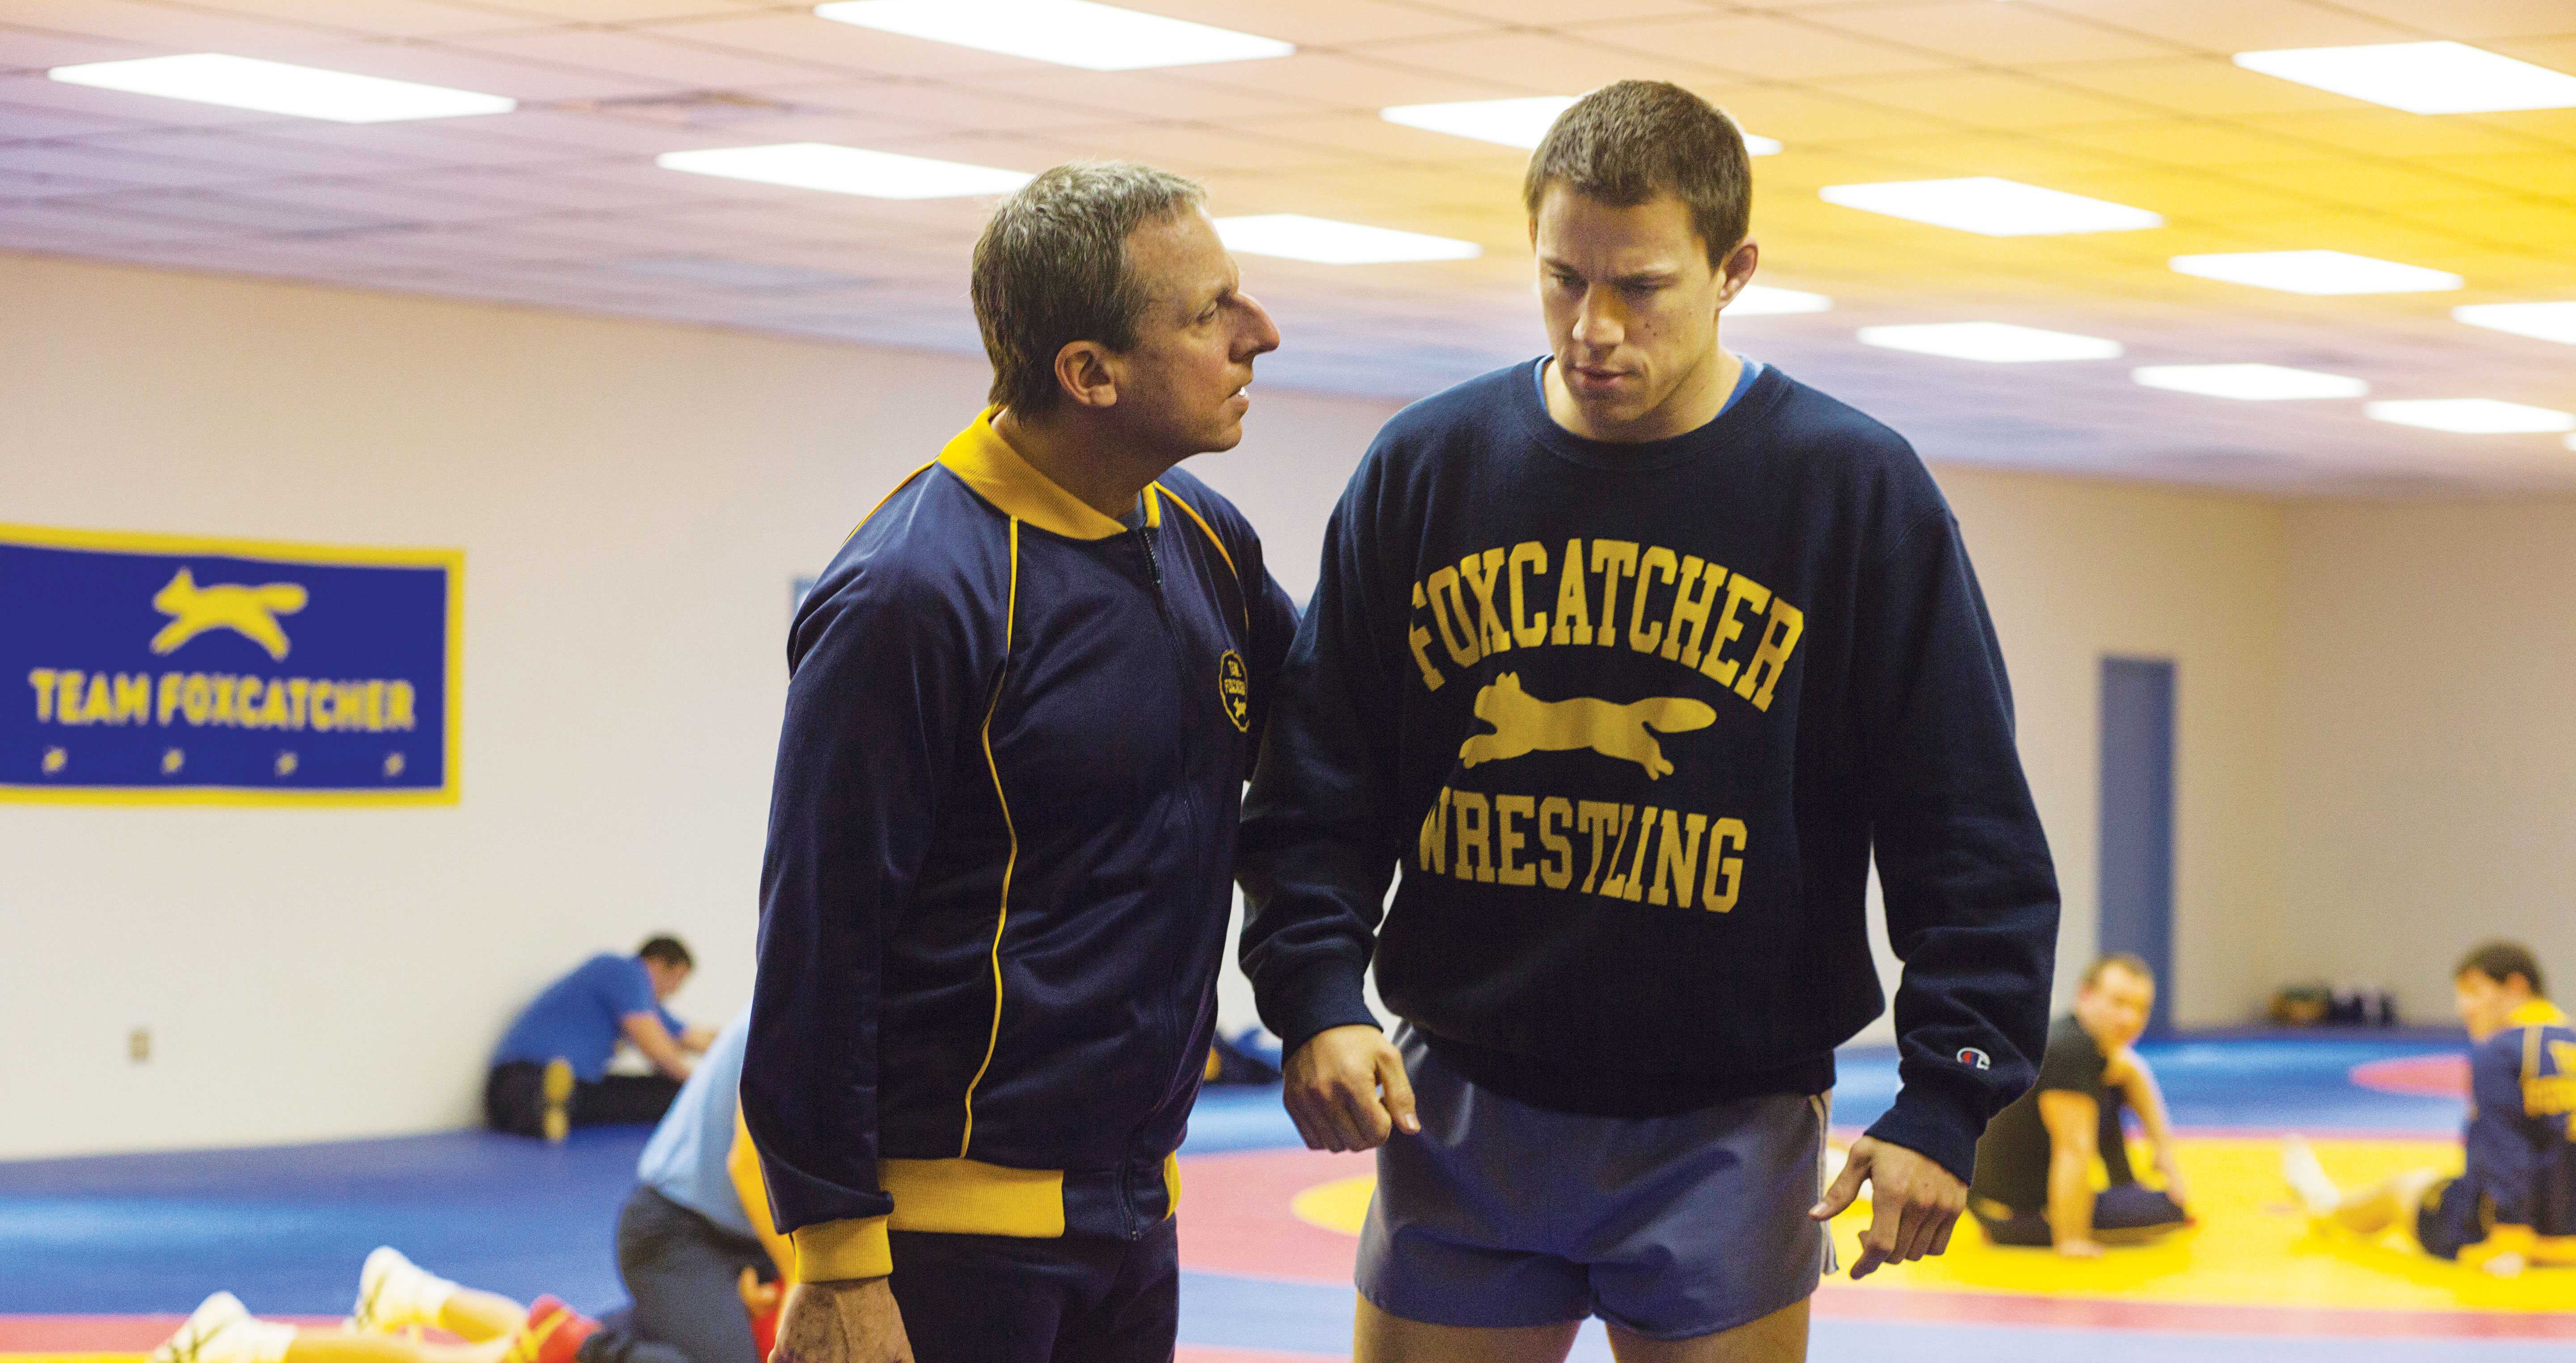 Review: ‘Foxcatcher’ provides riveting character study